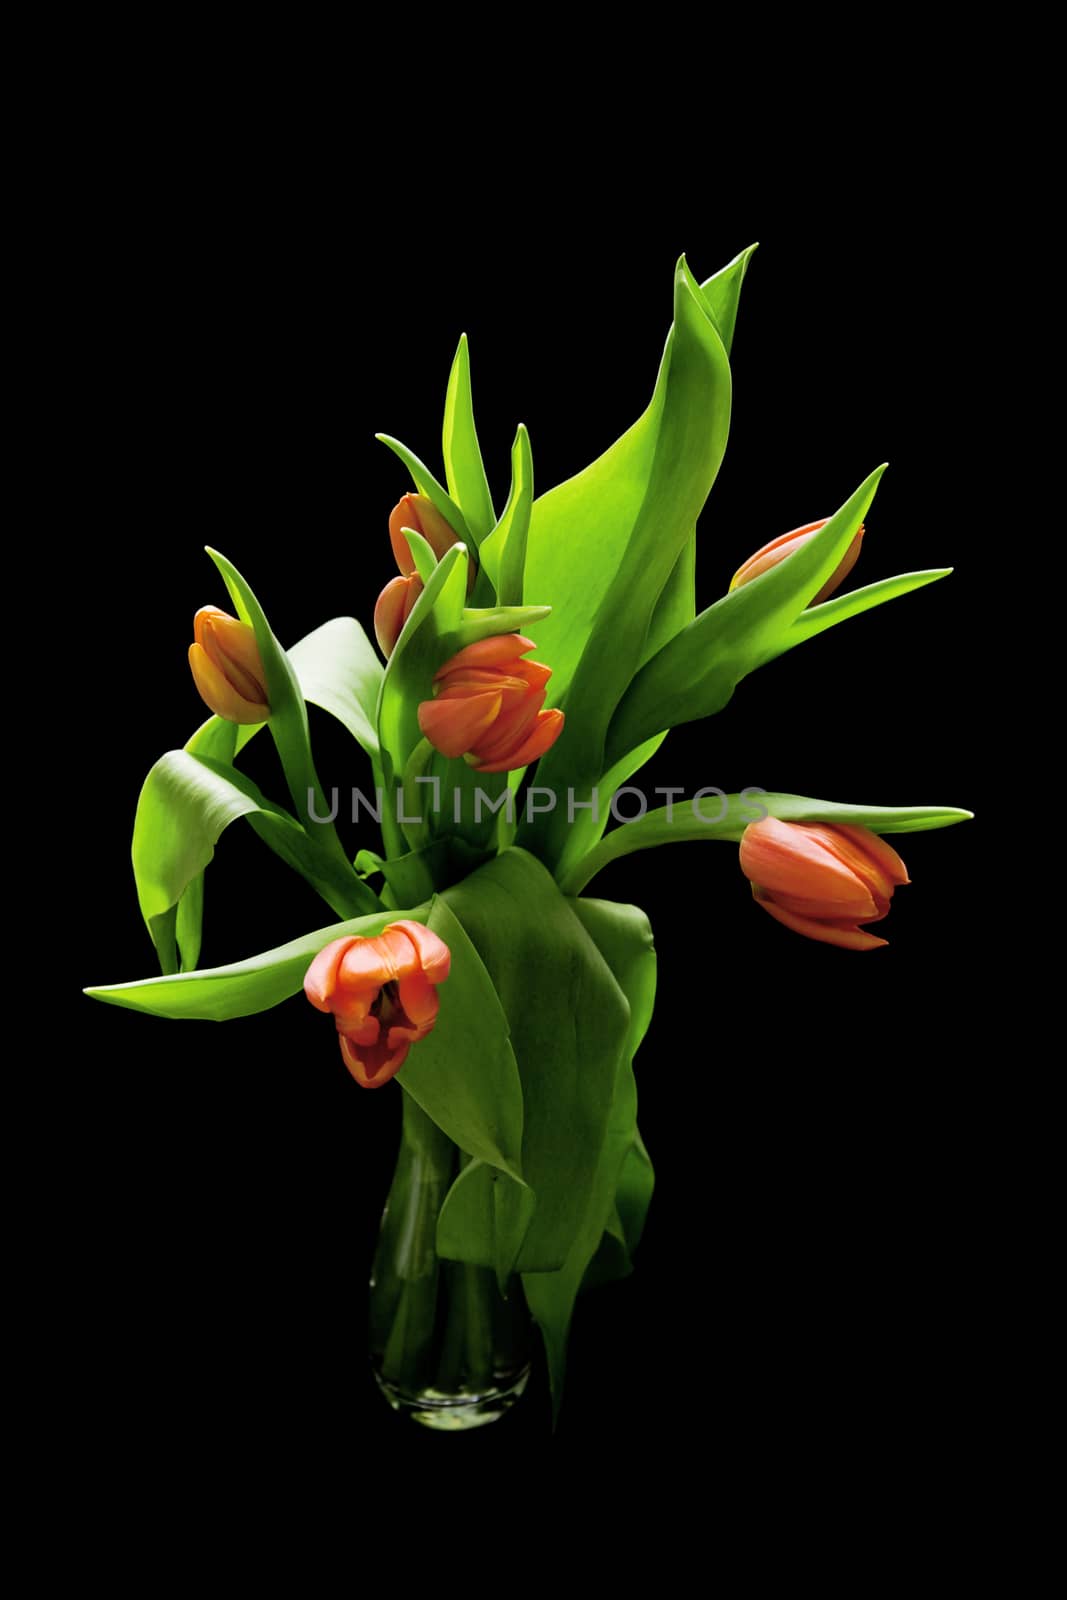 bouquet of red tulips on black background